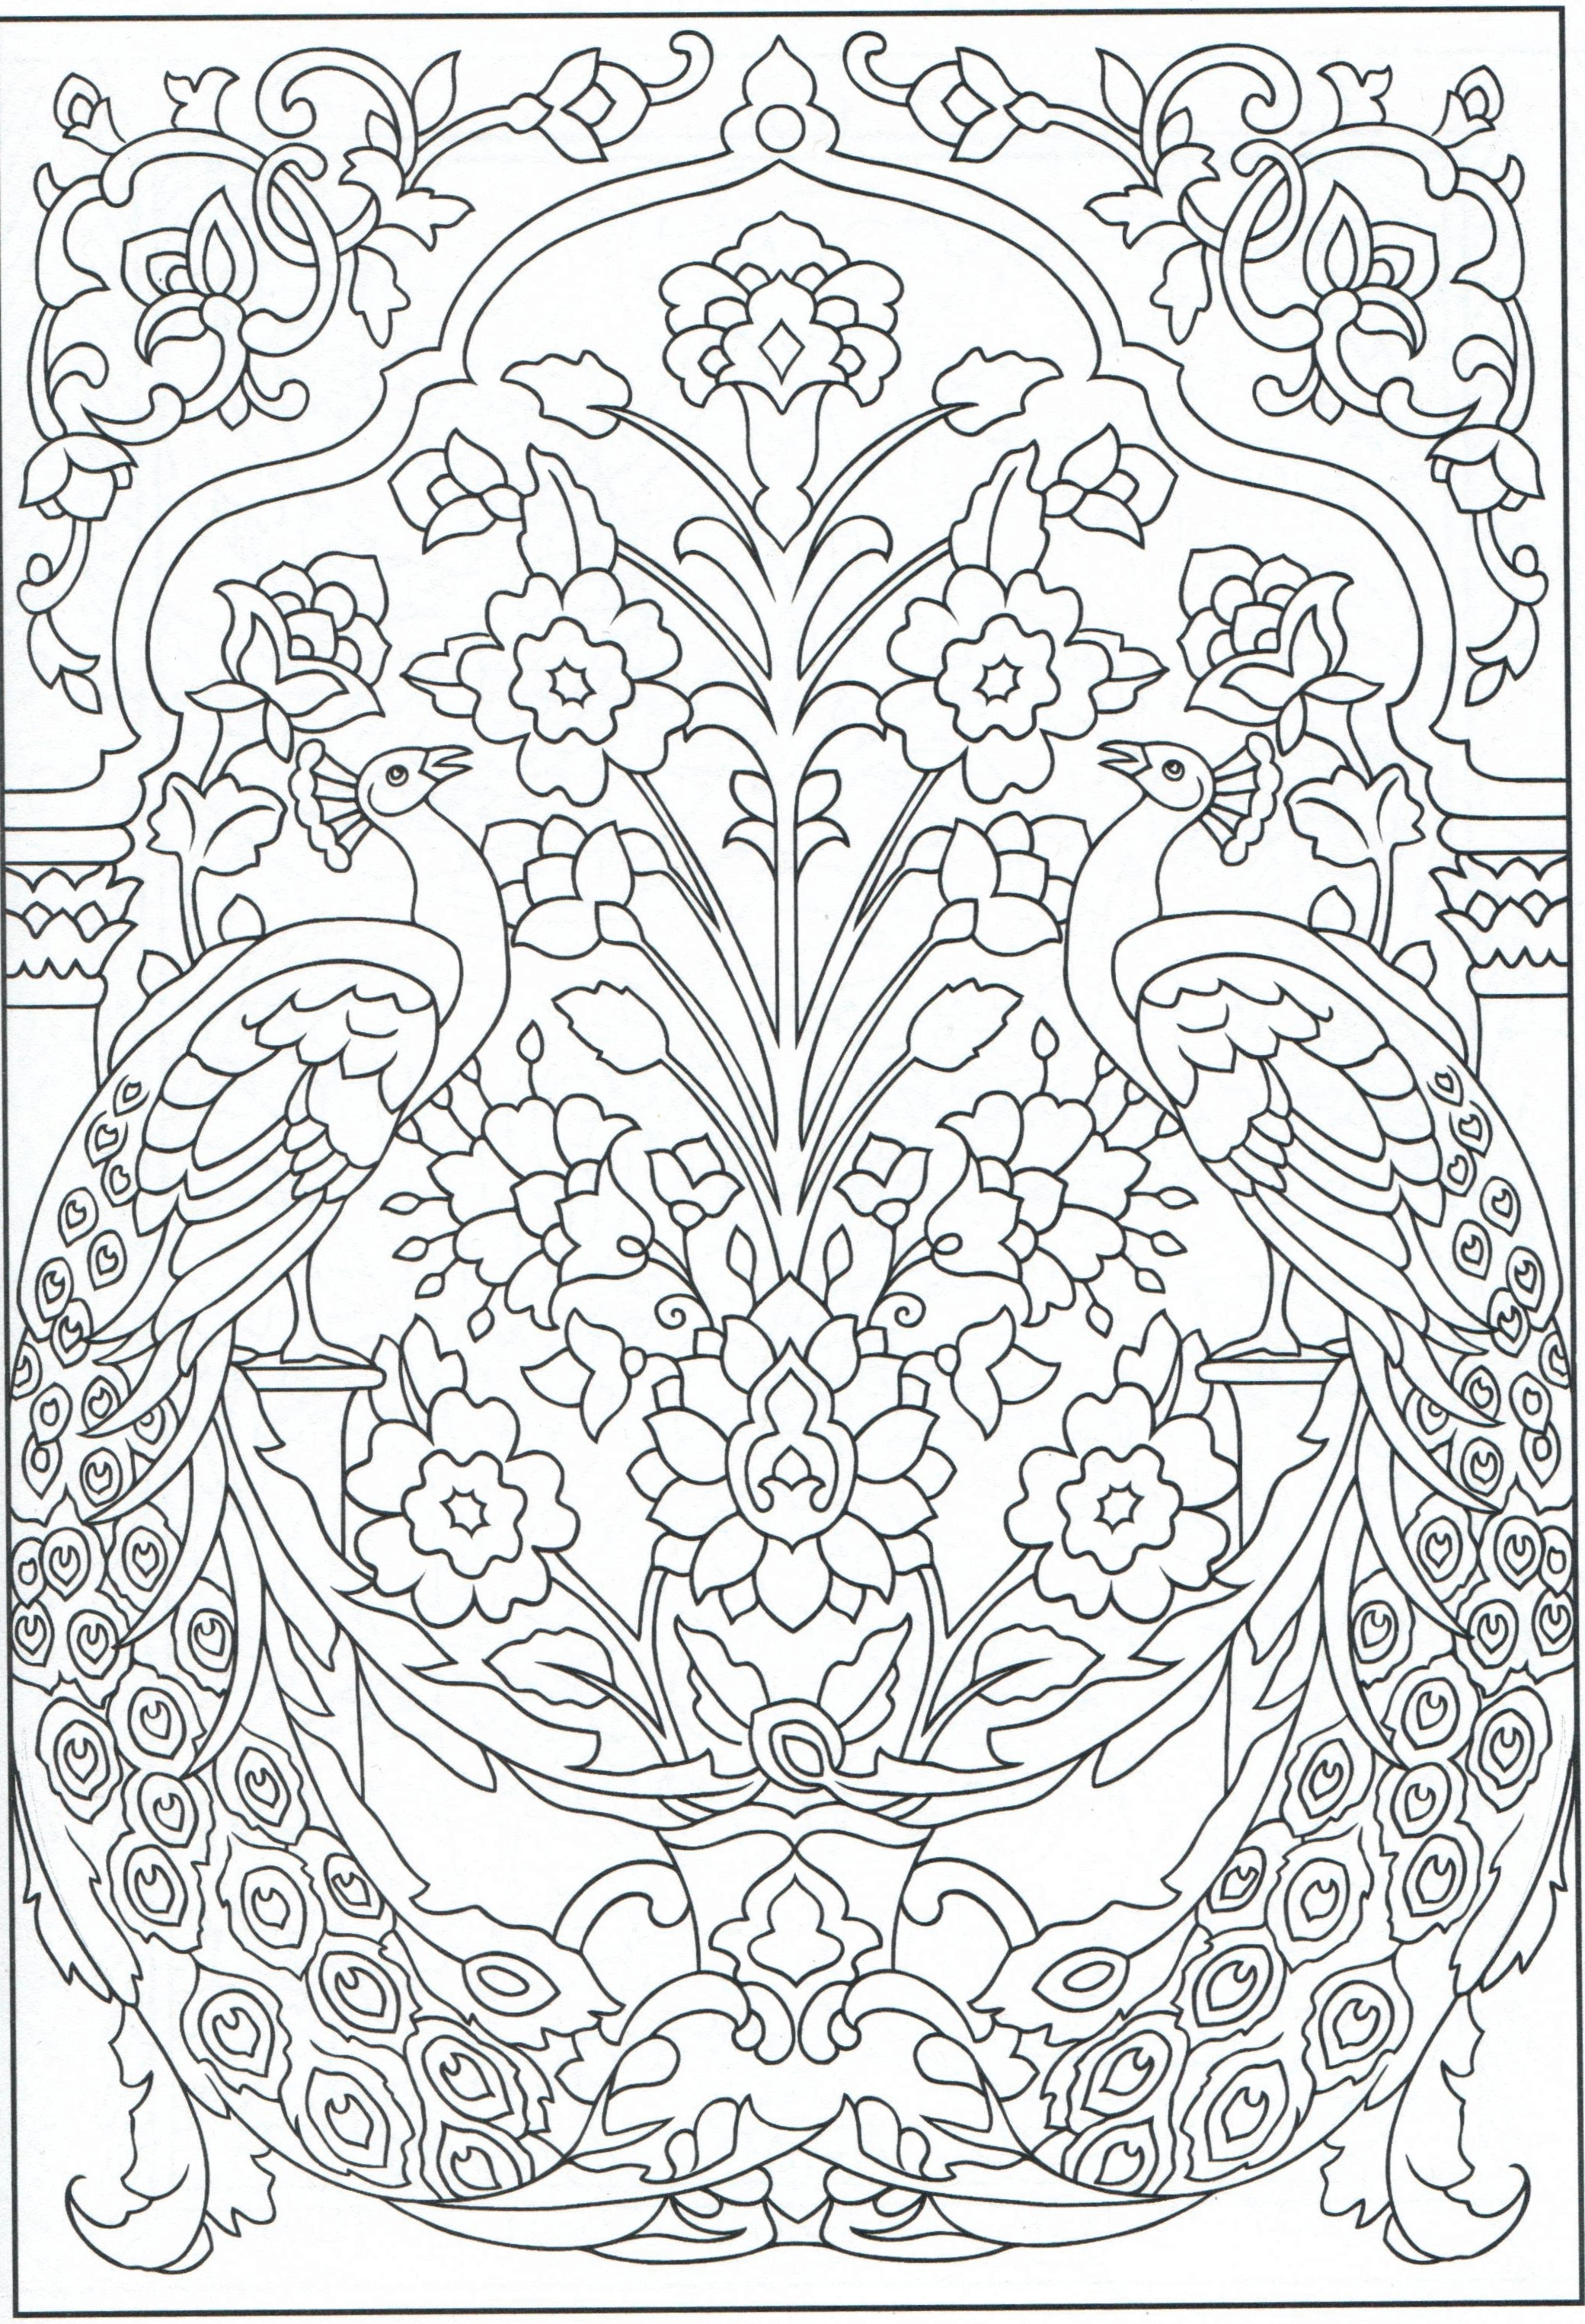 Color Me Happy Coloring Pages at GetColorings.com | Free printable